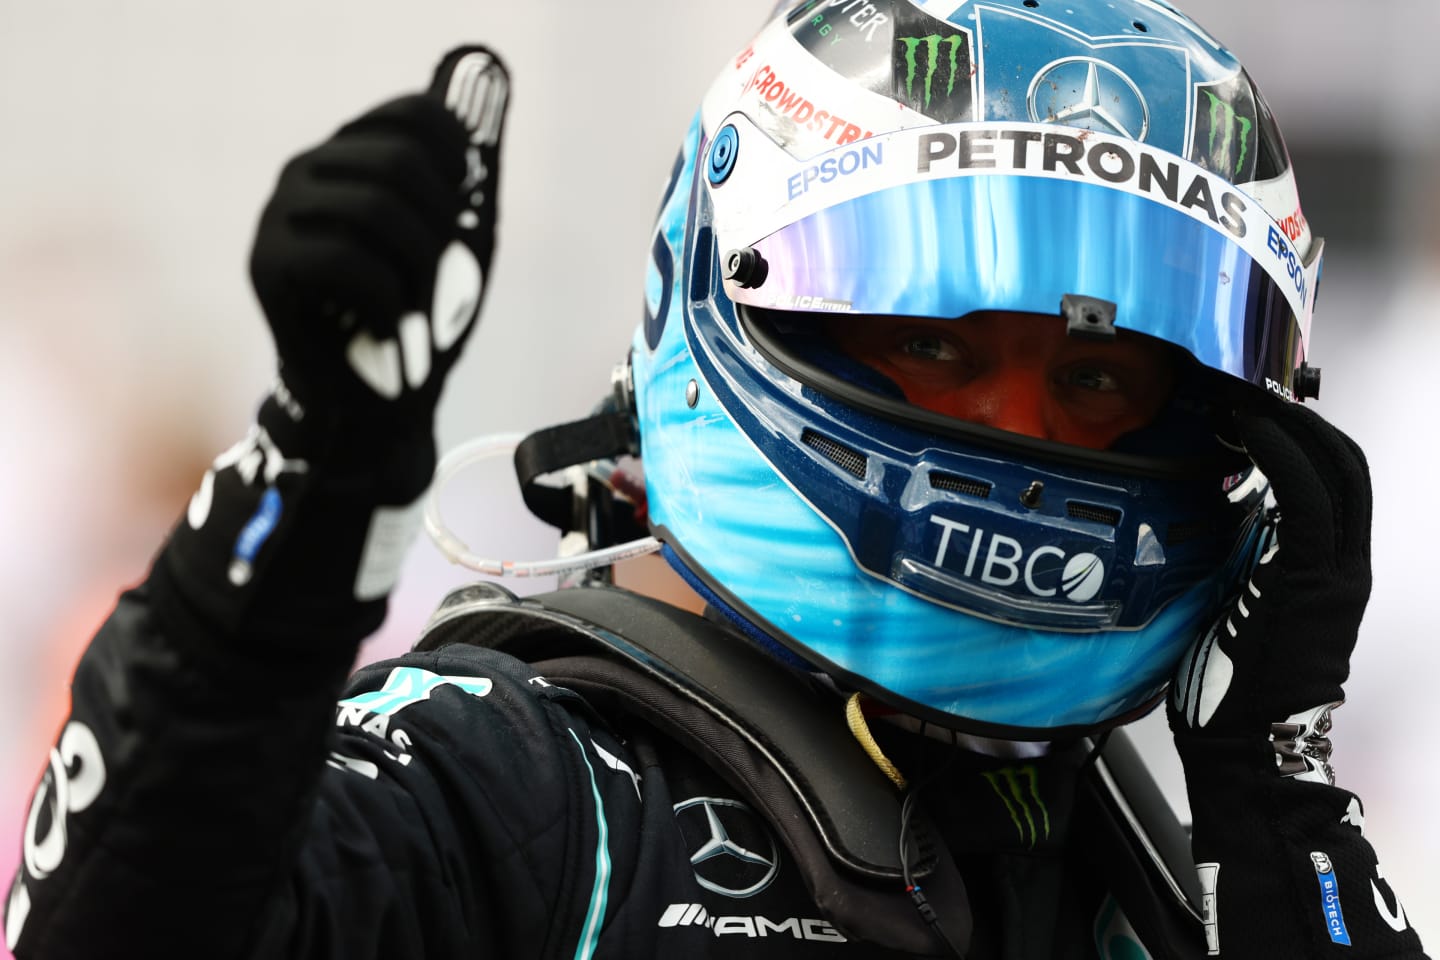 SPIELBERG, AUSTRIA - JUNE 27: Third placed Valtteri Bottas of Finland and Mercedes GP celebrates in parc ferme during the F1 Grand Prix of Styria at Red Bull Ring on June 27, 2021 in Spielberg, Austria. (Photo by Bryn Lennon/Getty Images)